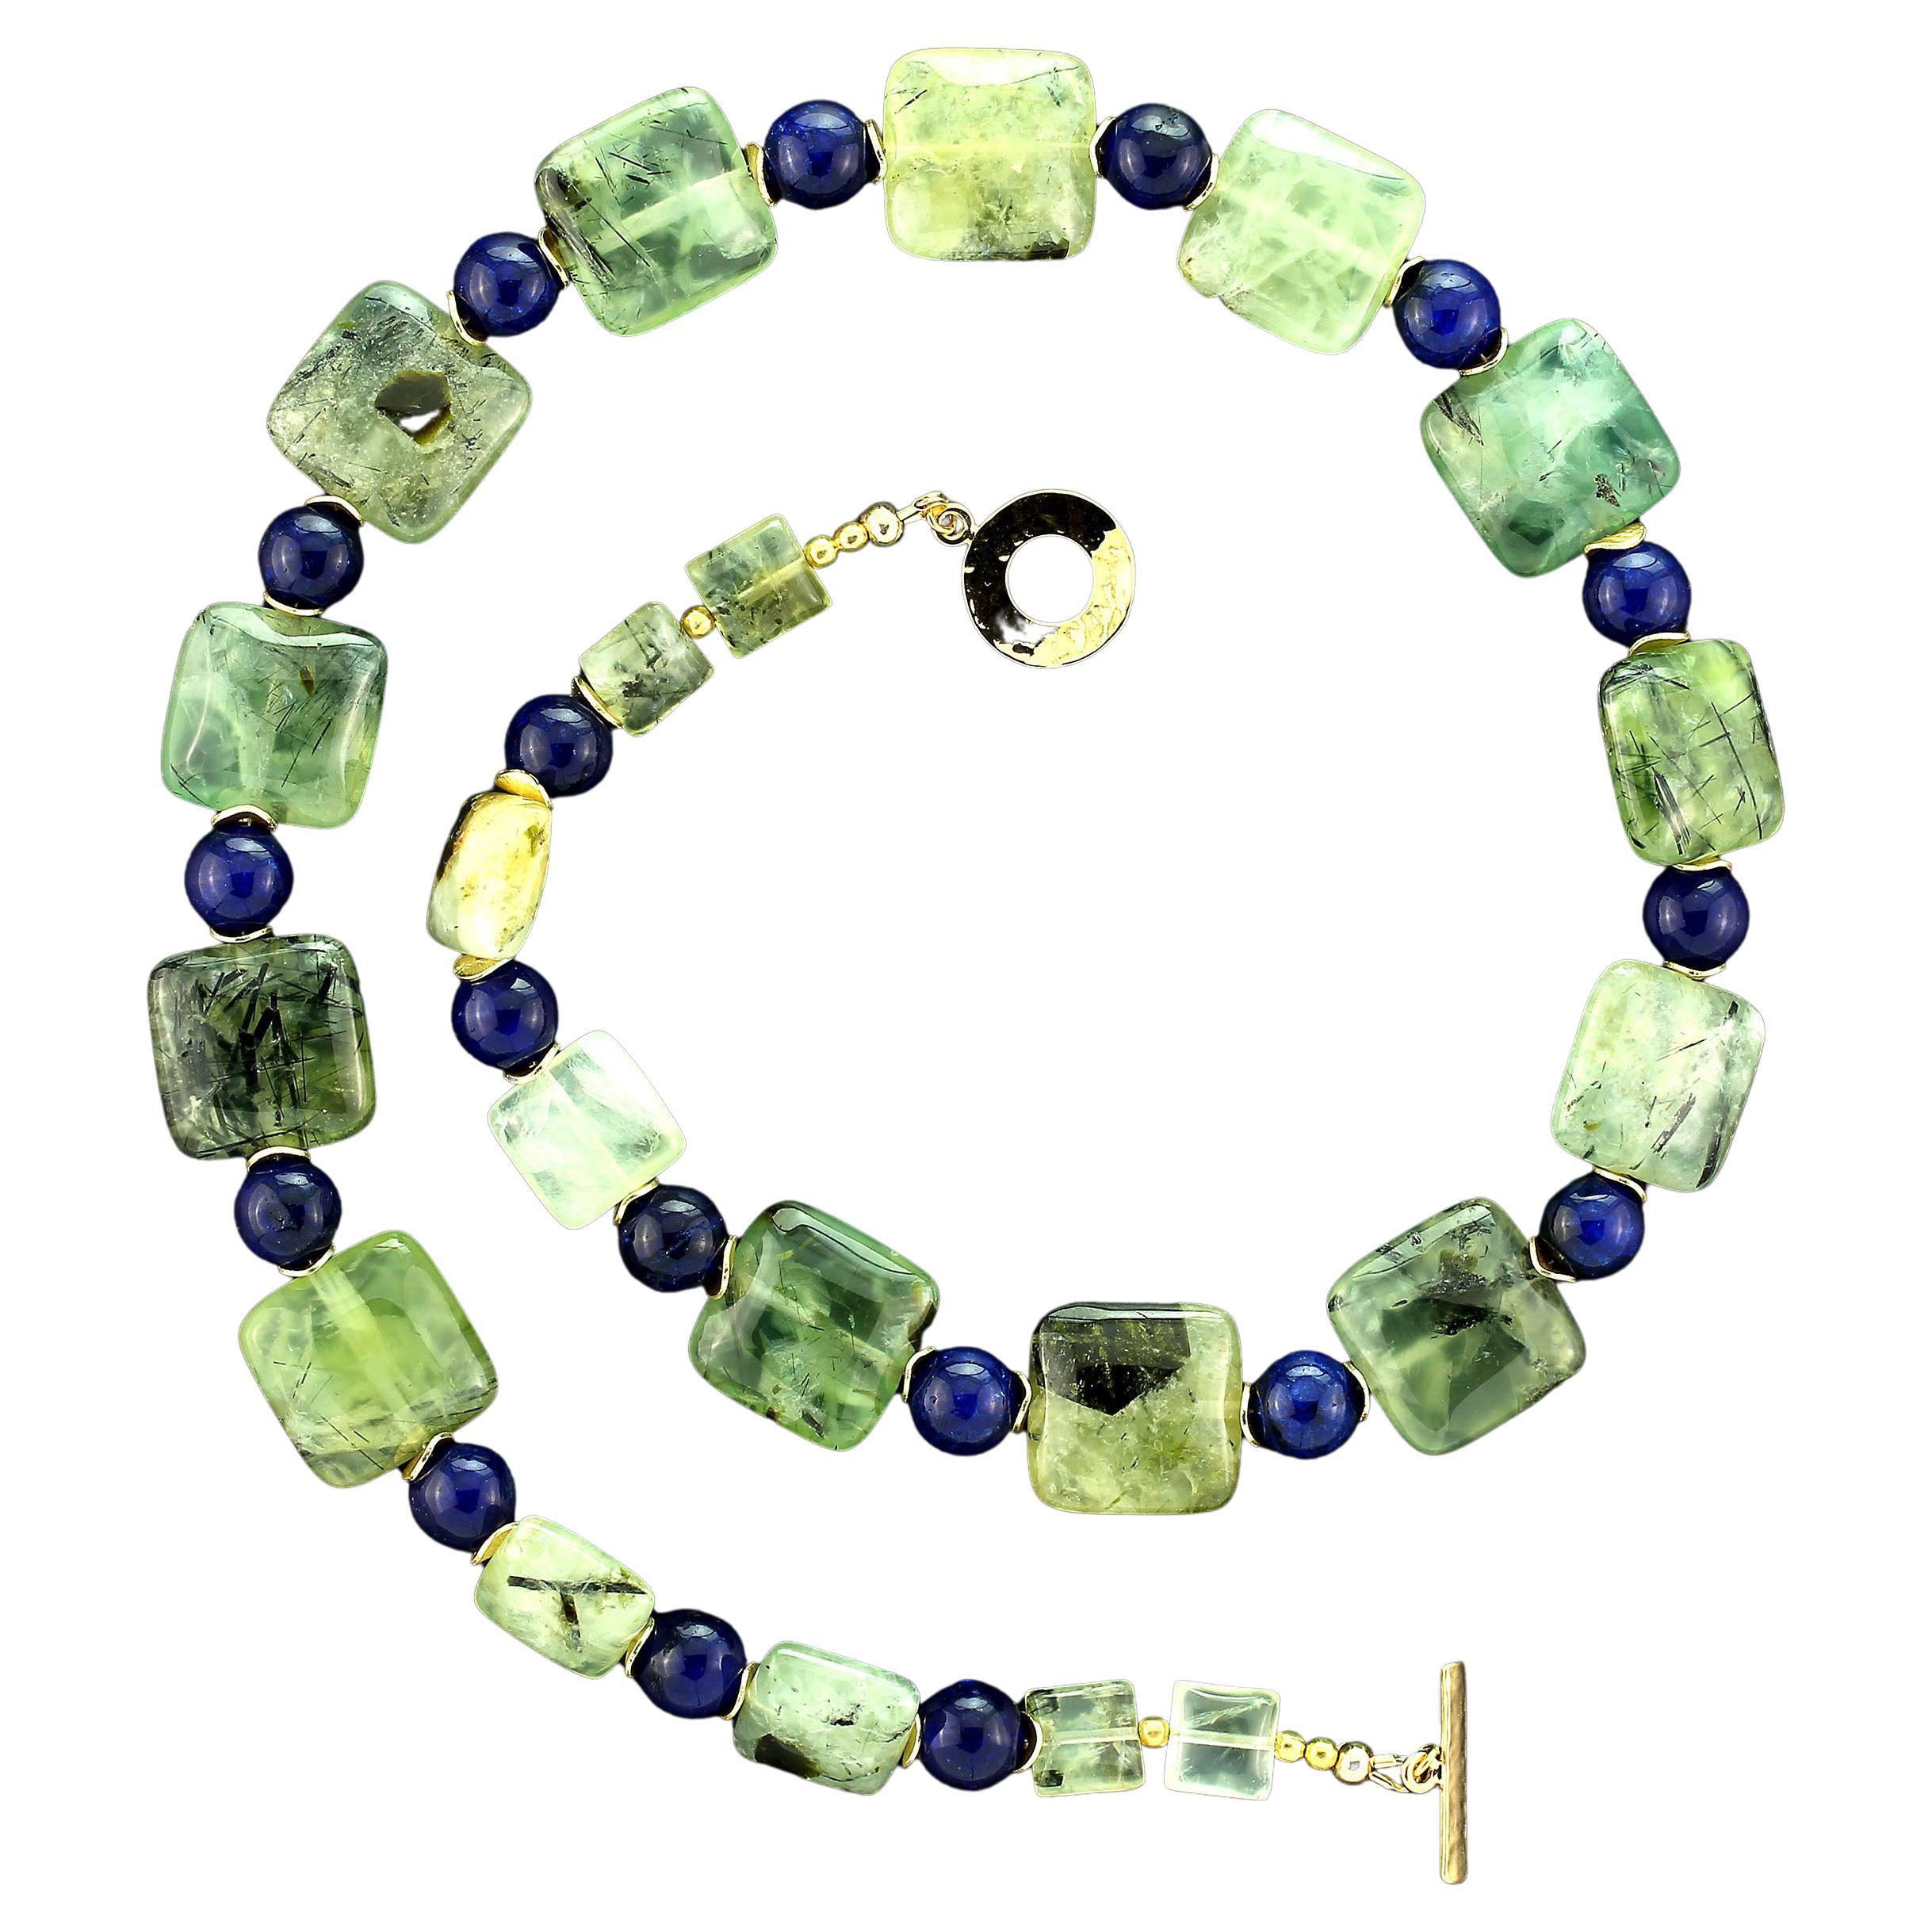  AJD Glowing Green Brazilian Prehnite with Blue Agate Necklace    Great Gift!!